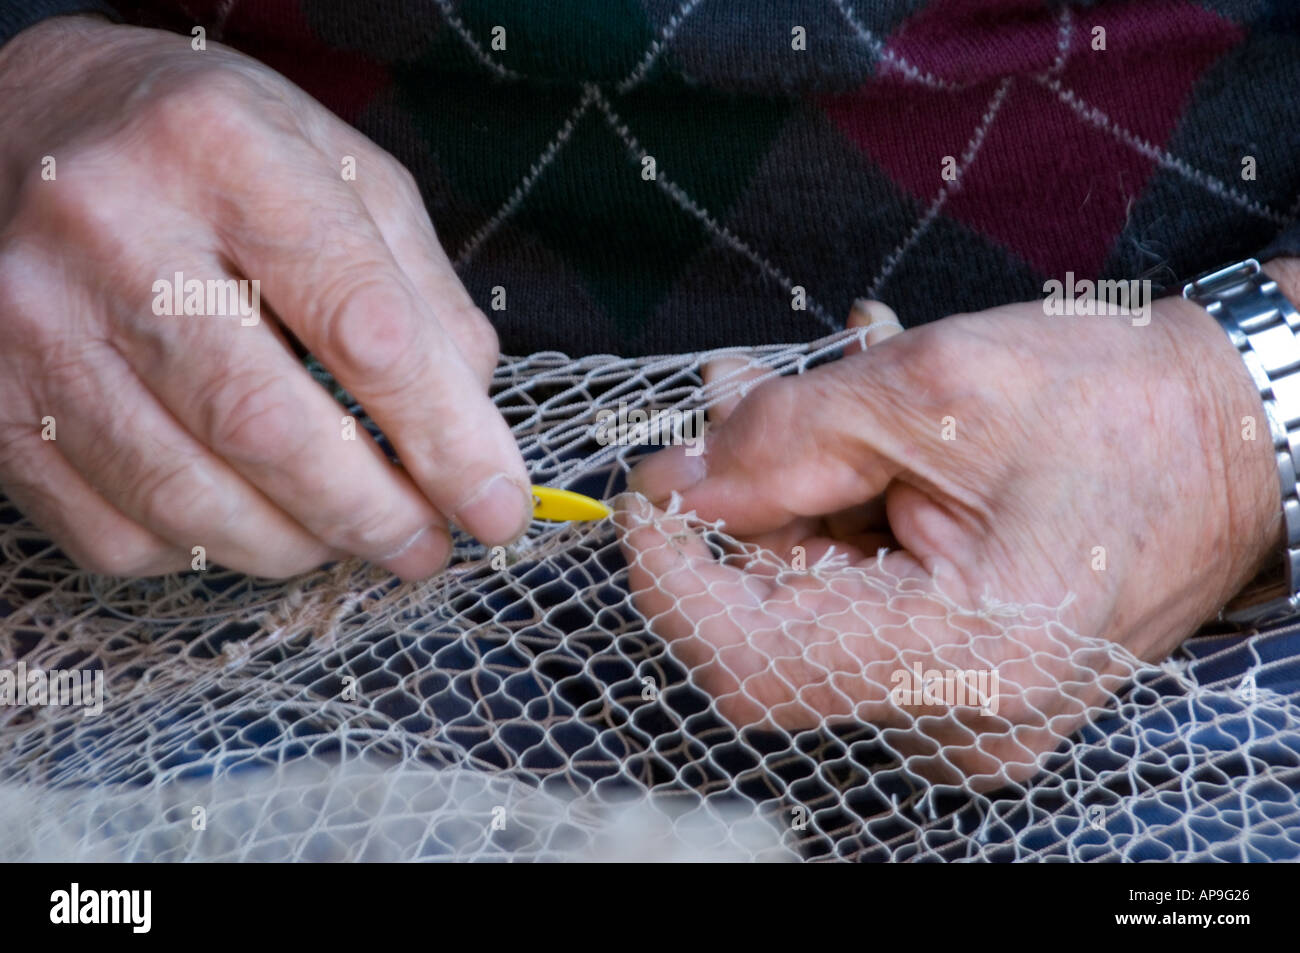 Elderly hands repairing a fishing net the old fashion way Stock